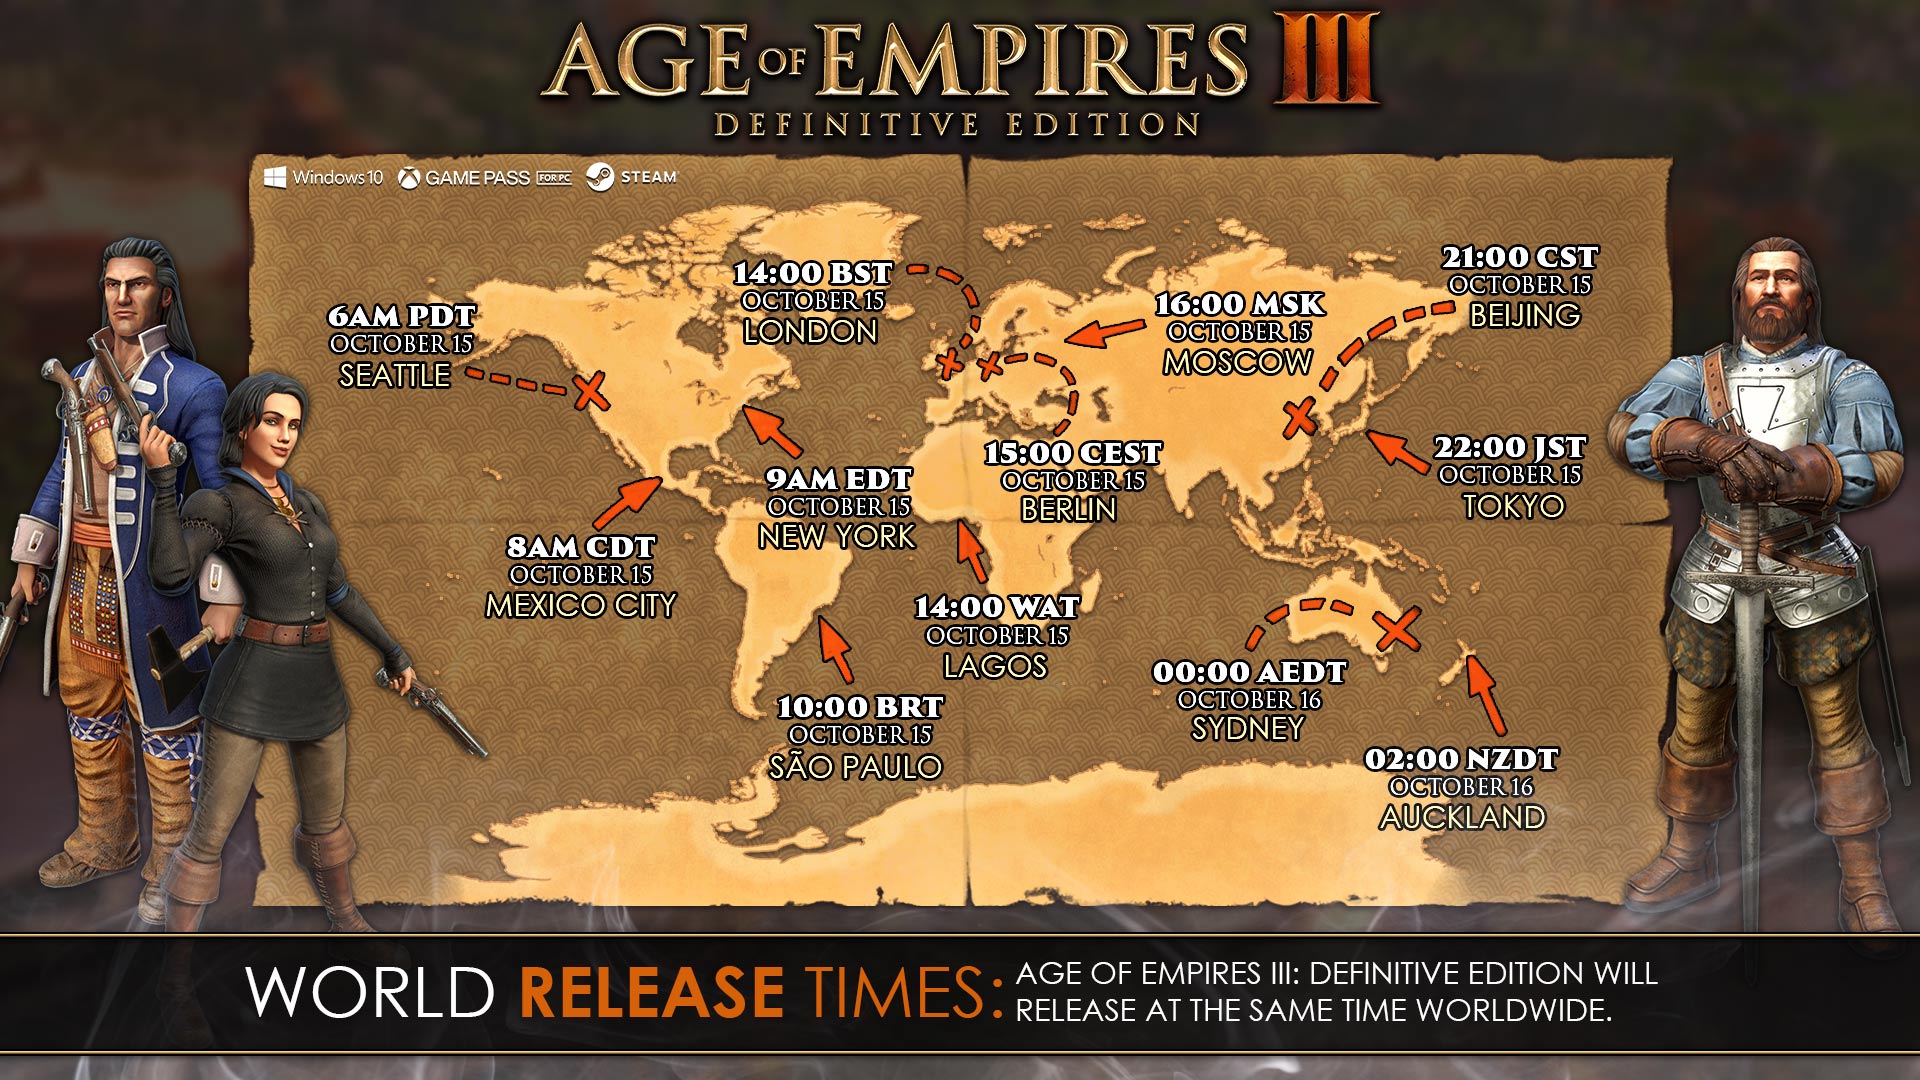 age of empires 3 product key for steam